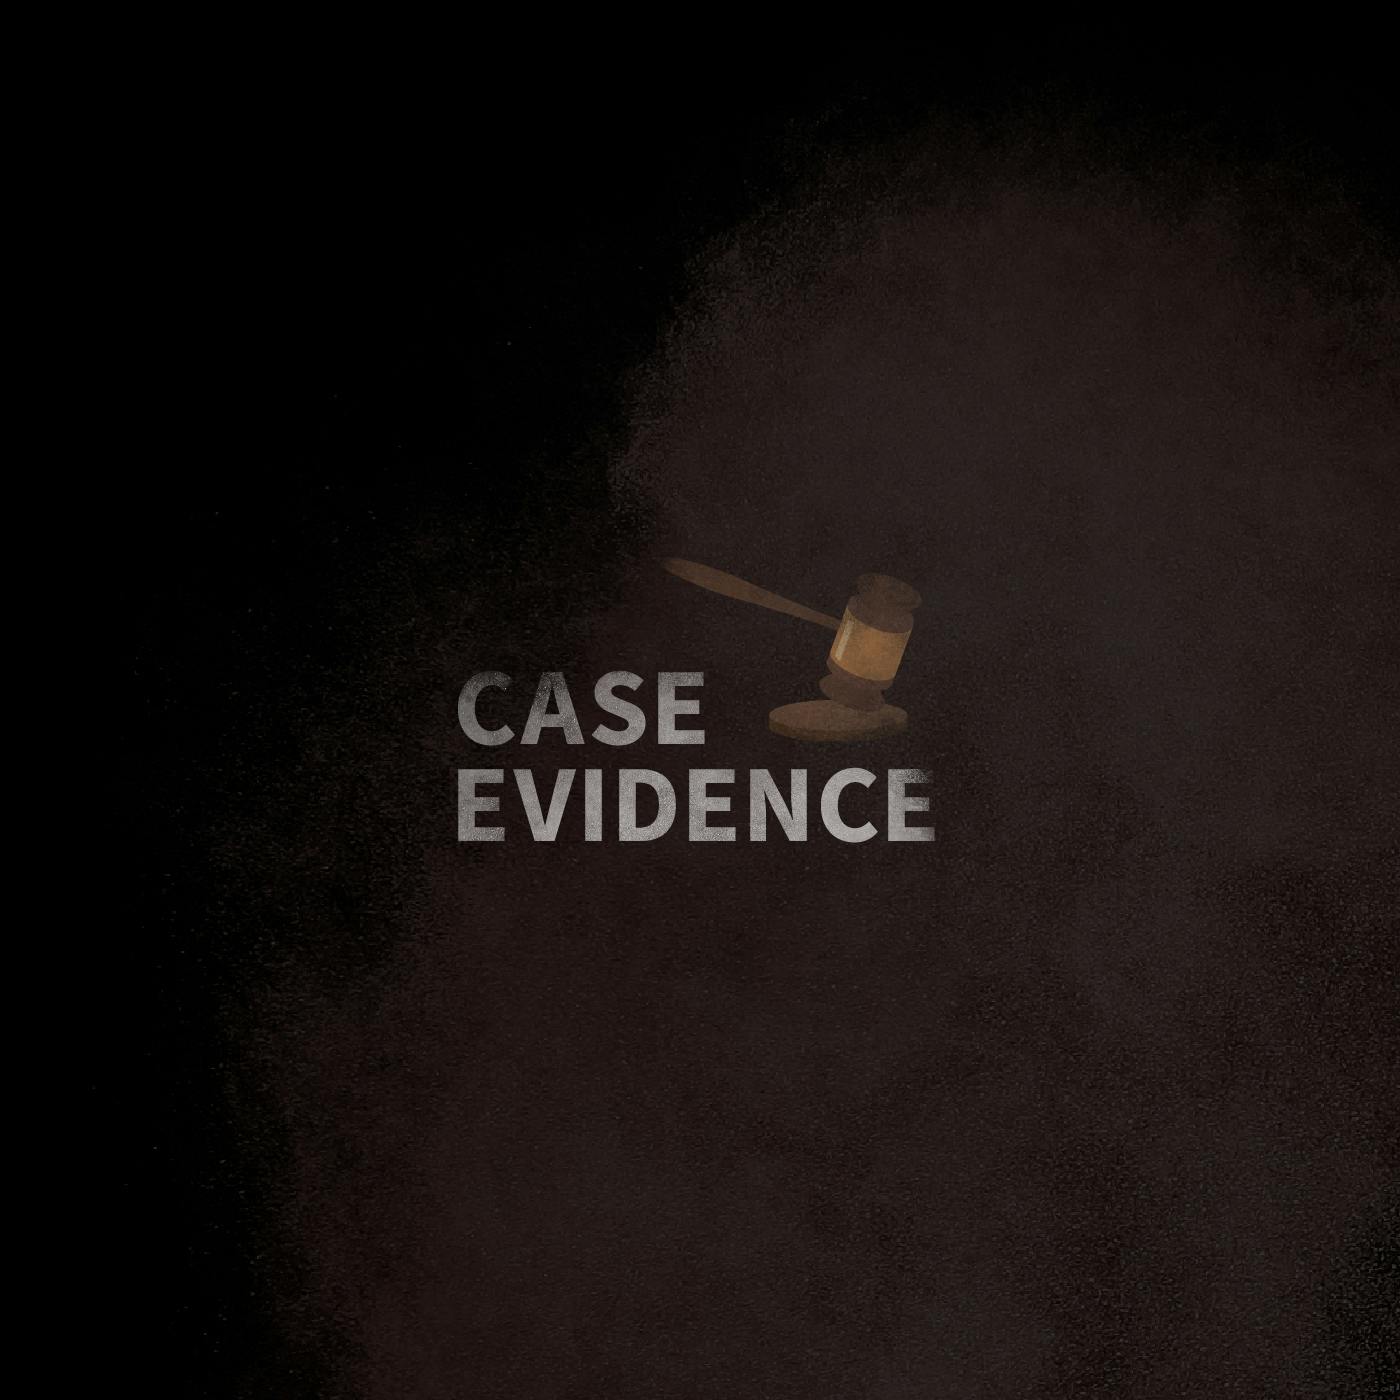 Case Evidence 03.20.17 by Tenderfoot TV